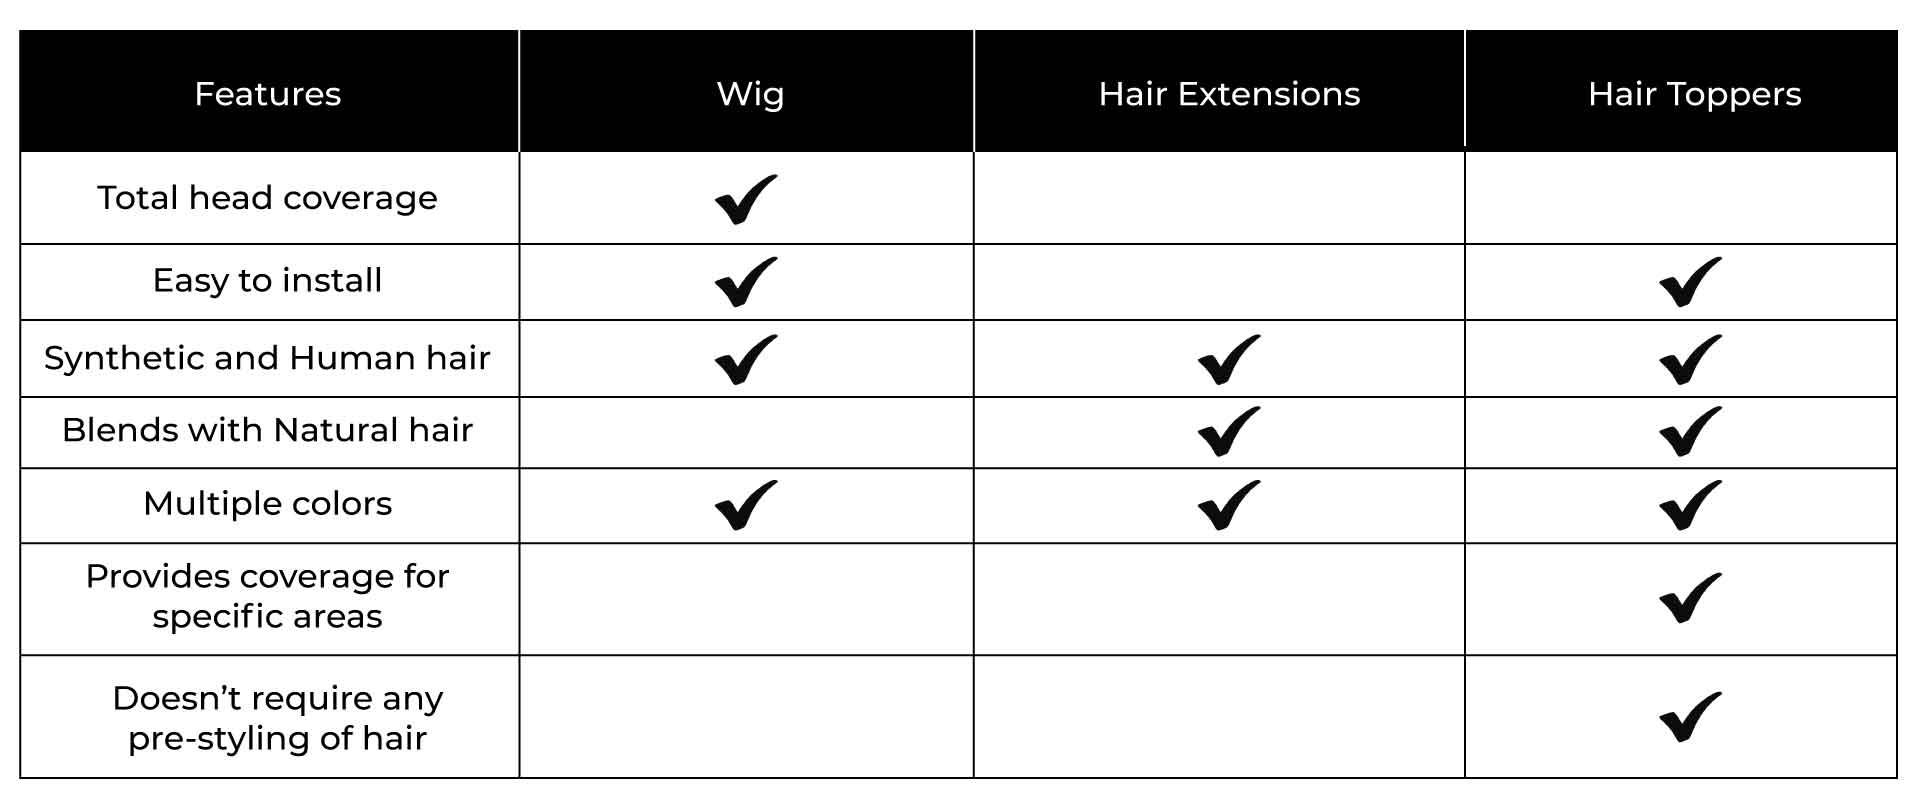 Hair Toppers vs. Wigs vs. Hair Extensions